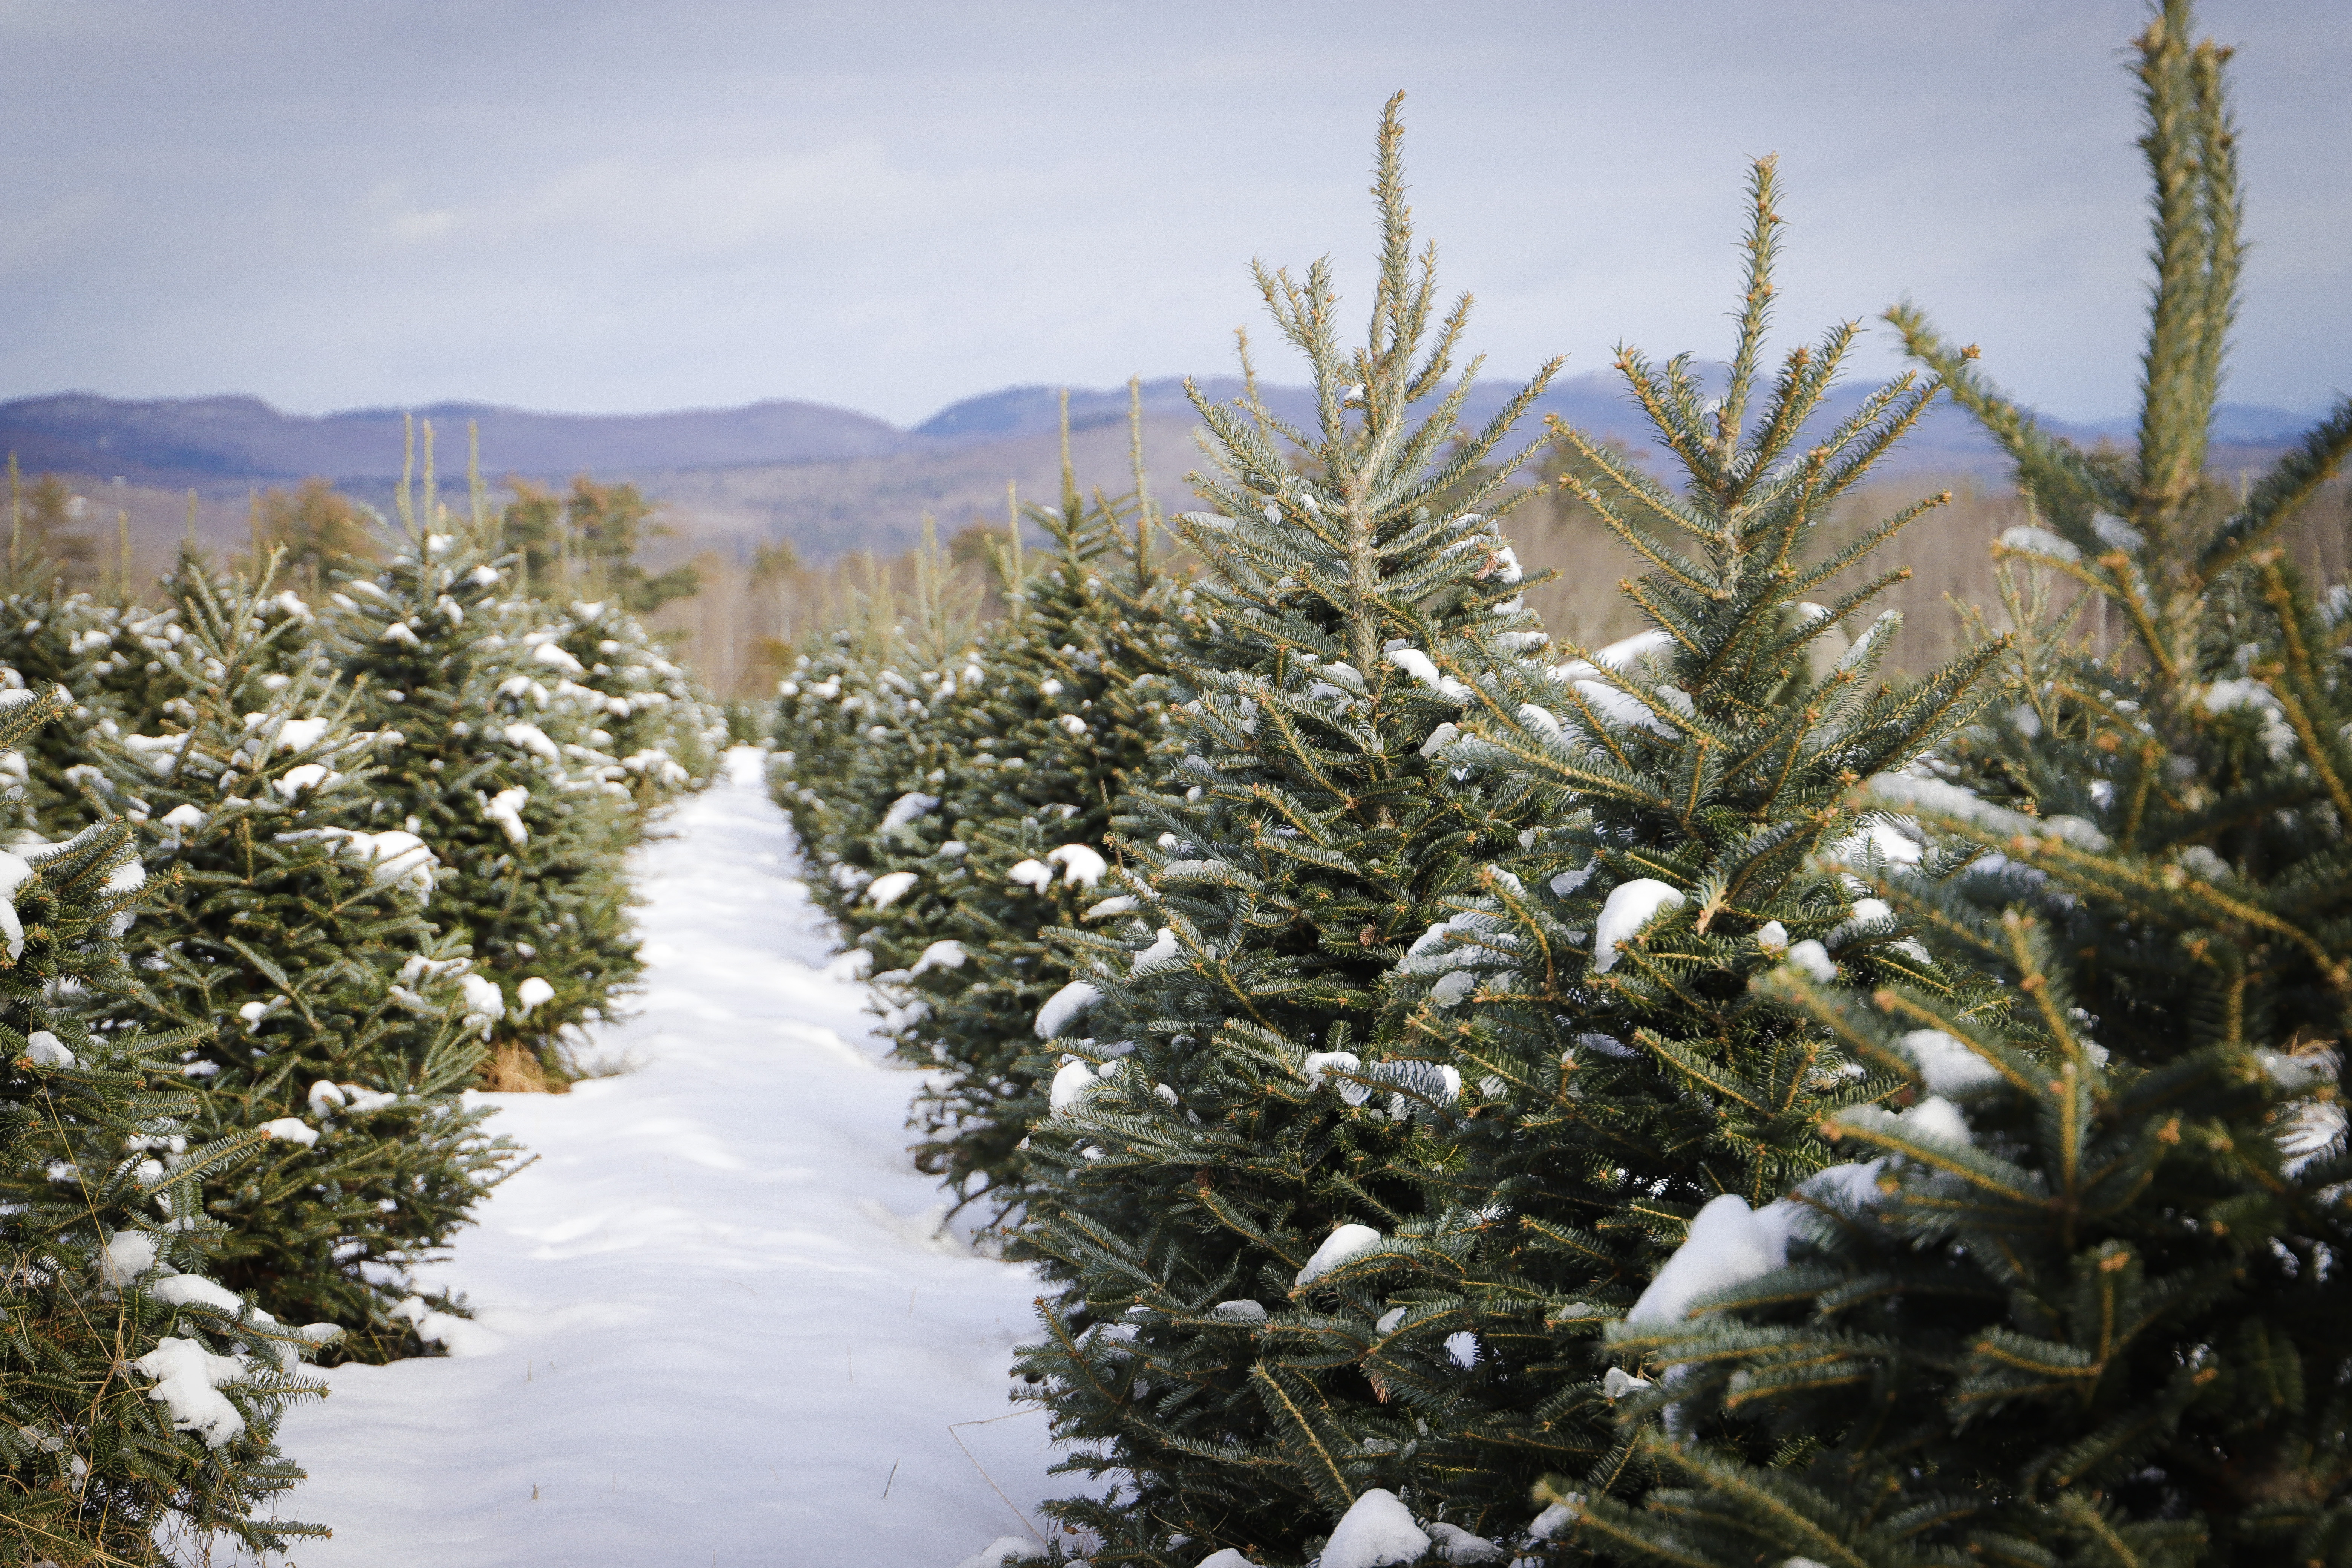 Looking through the rows of Christmas trees at The Rocks in winter.